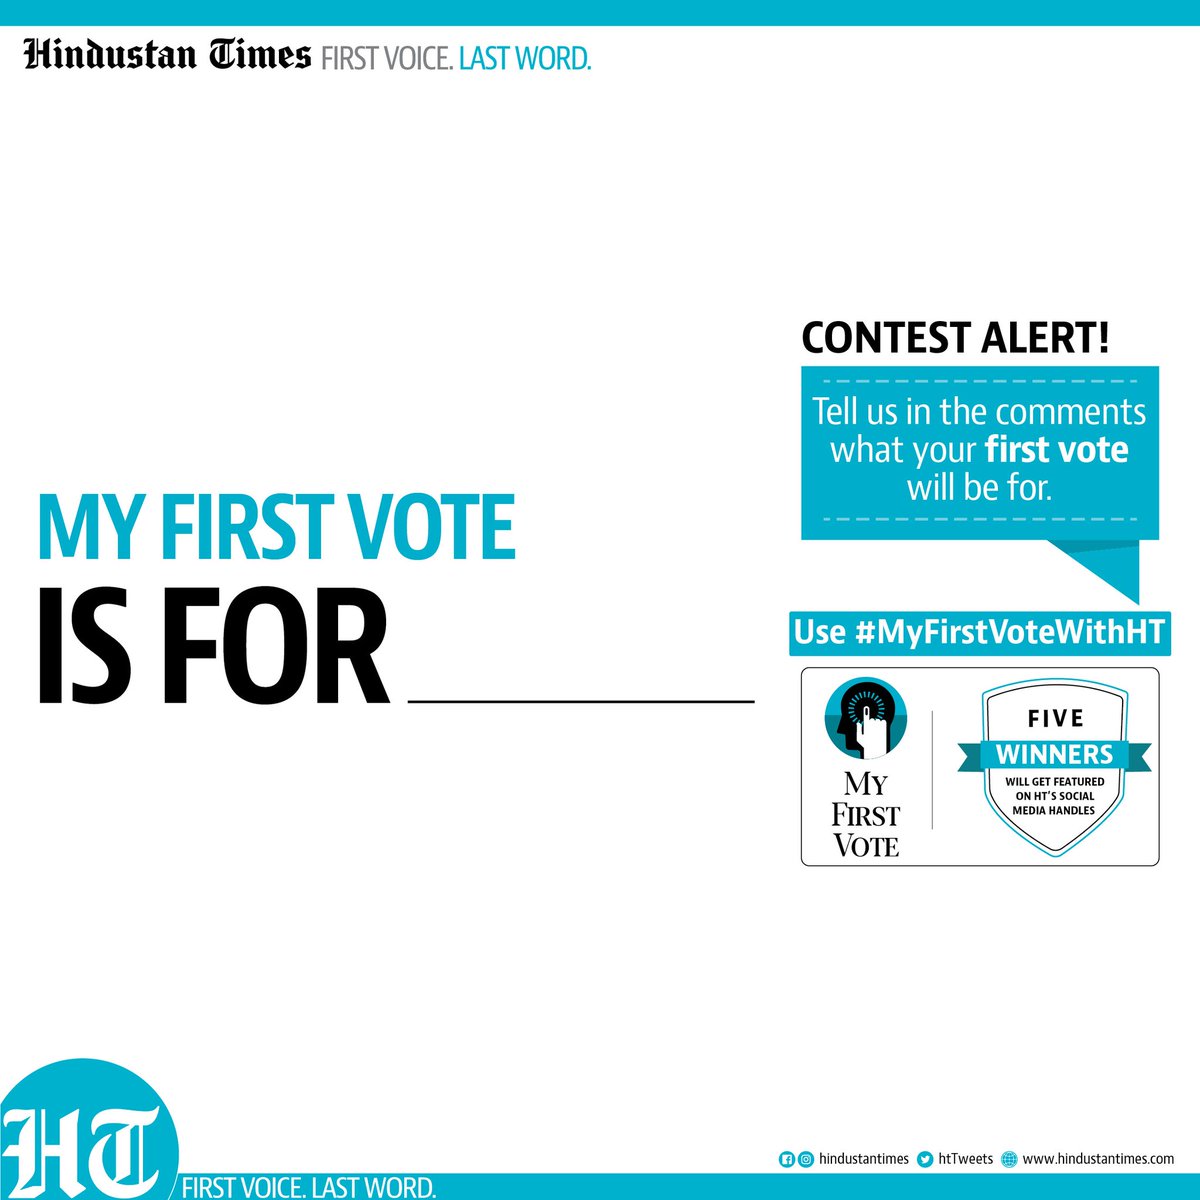 #FirstVoteWithHT Reflecting on the diverse perspectives in @httweets, my first vote is for unity and harmony. What about you?